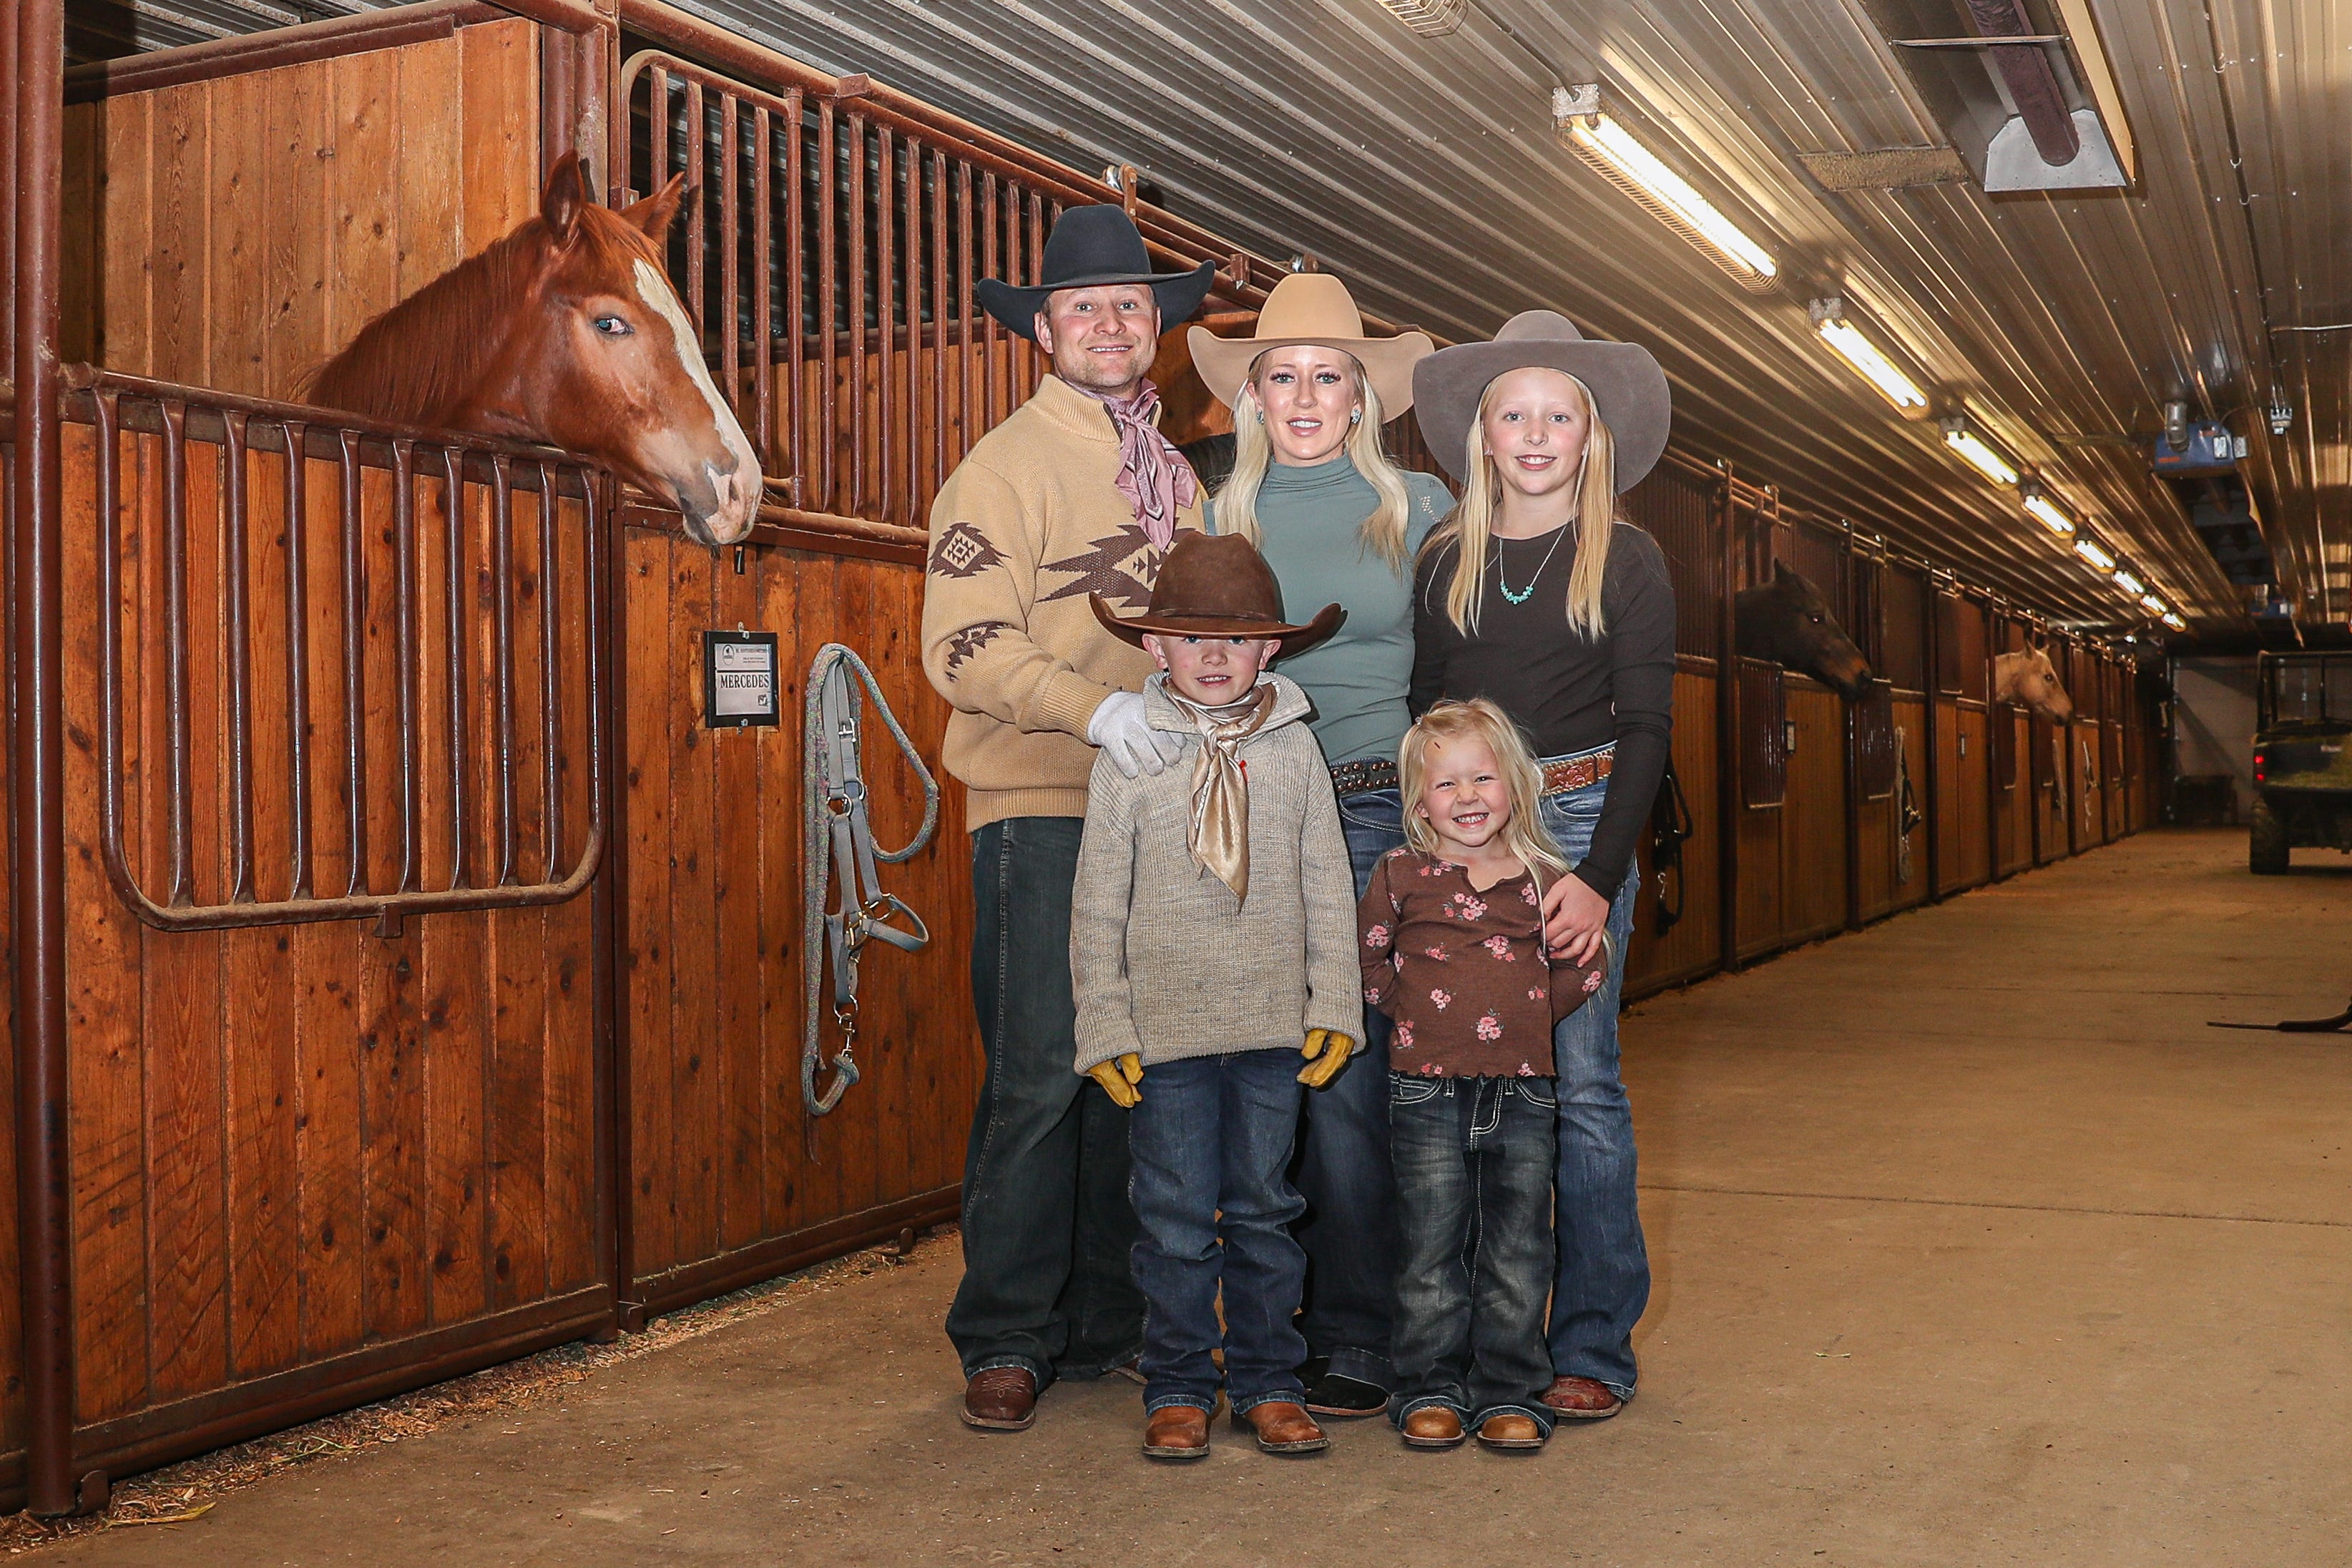 Jesse, Lindsay, and their three children pose for a photo in their barn